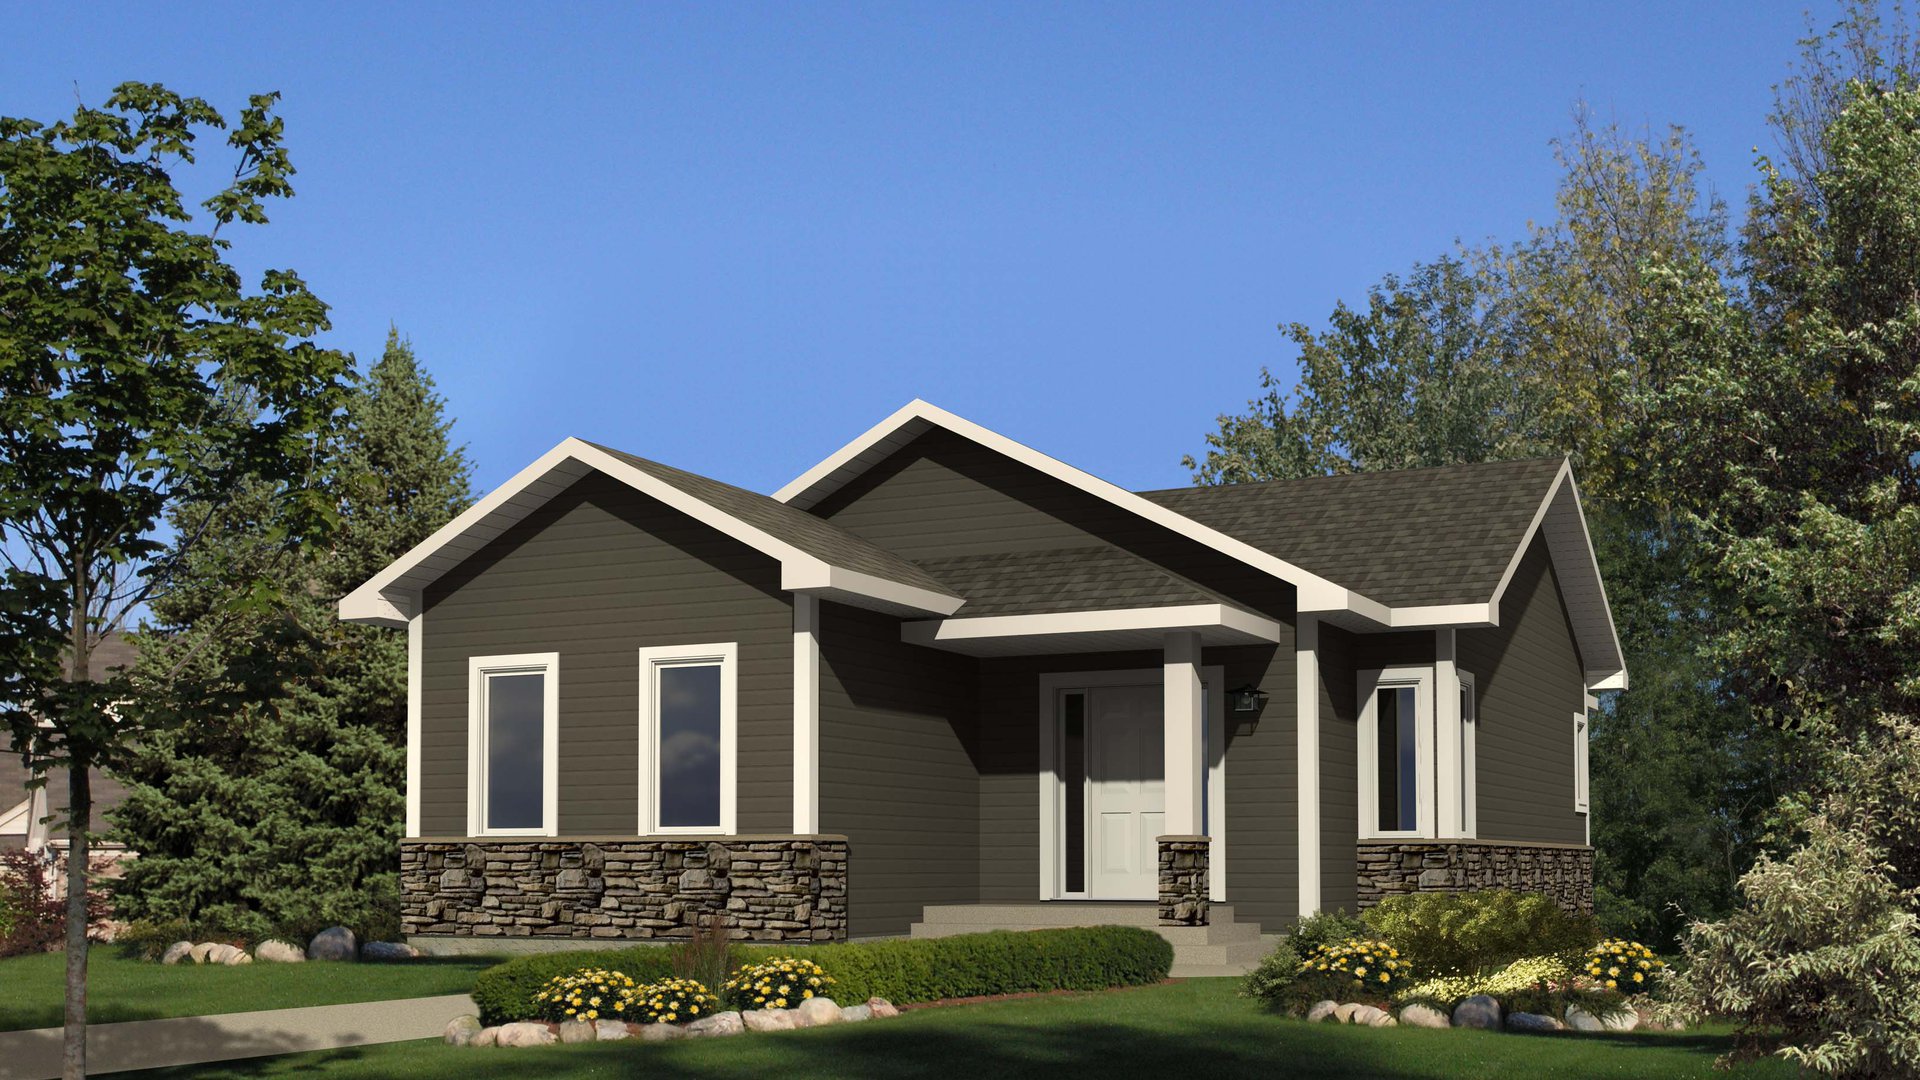 Daley house plan modular homes nelson homes ready to move homes prefabricated home packages.jpg